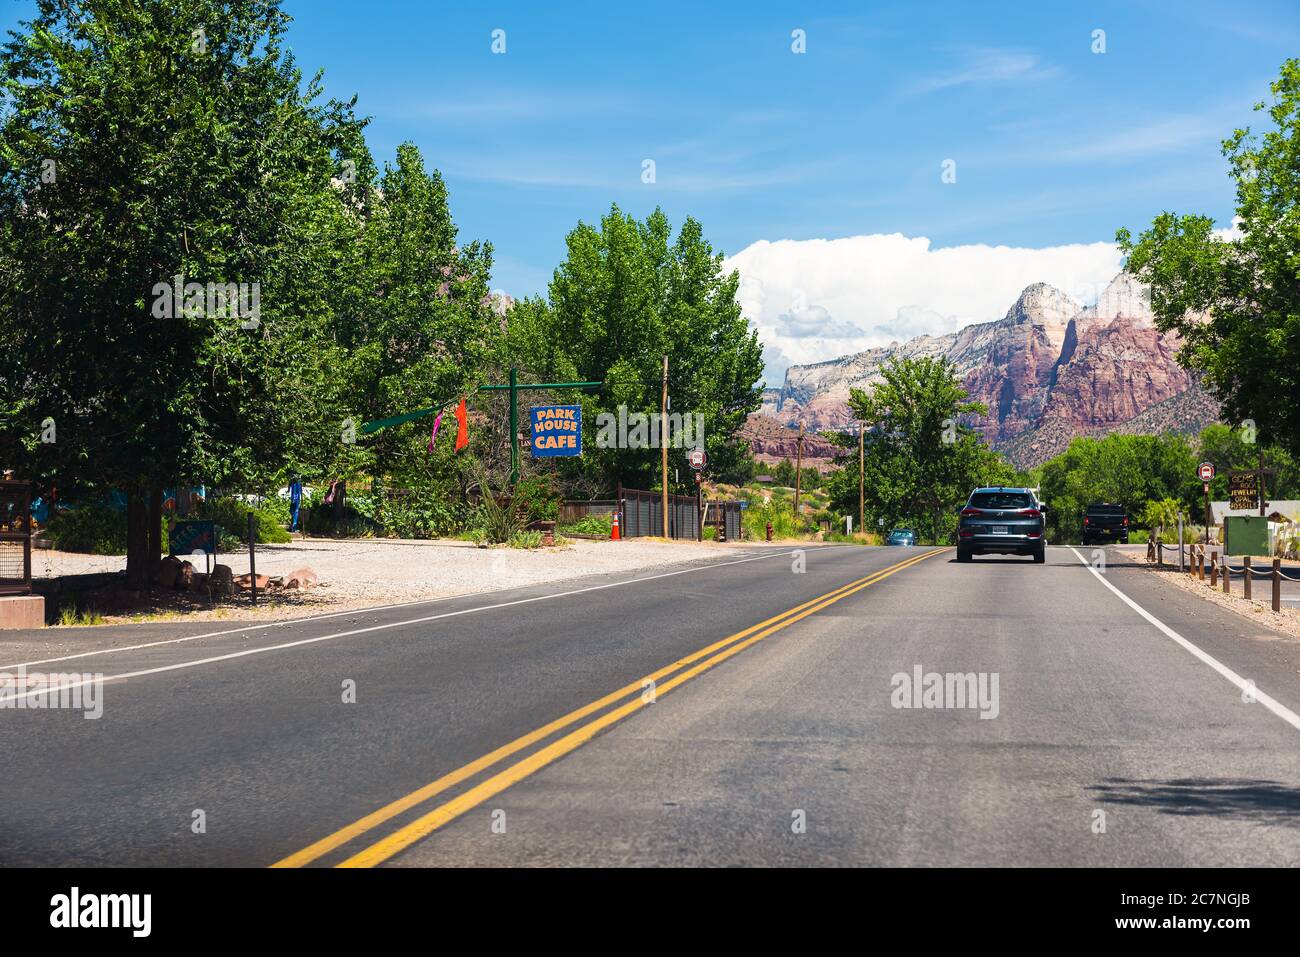 Springdale, USA - August 5, 2019: Zion National Park road in Utah and cars in road traffic point of view driving in city with restaurant shop stores s Stock Photo